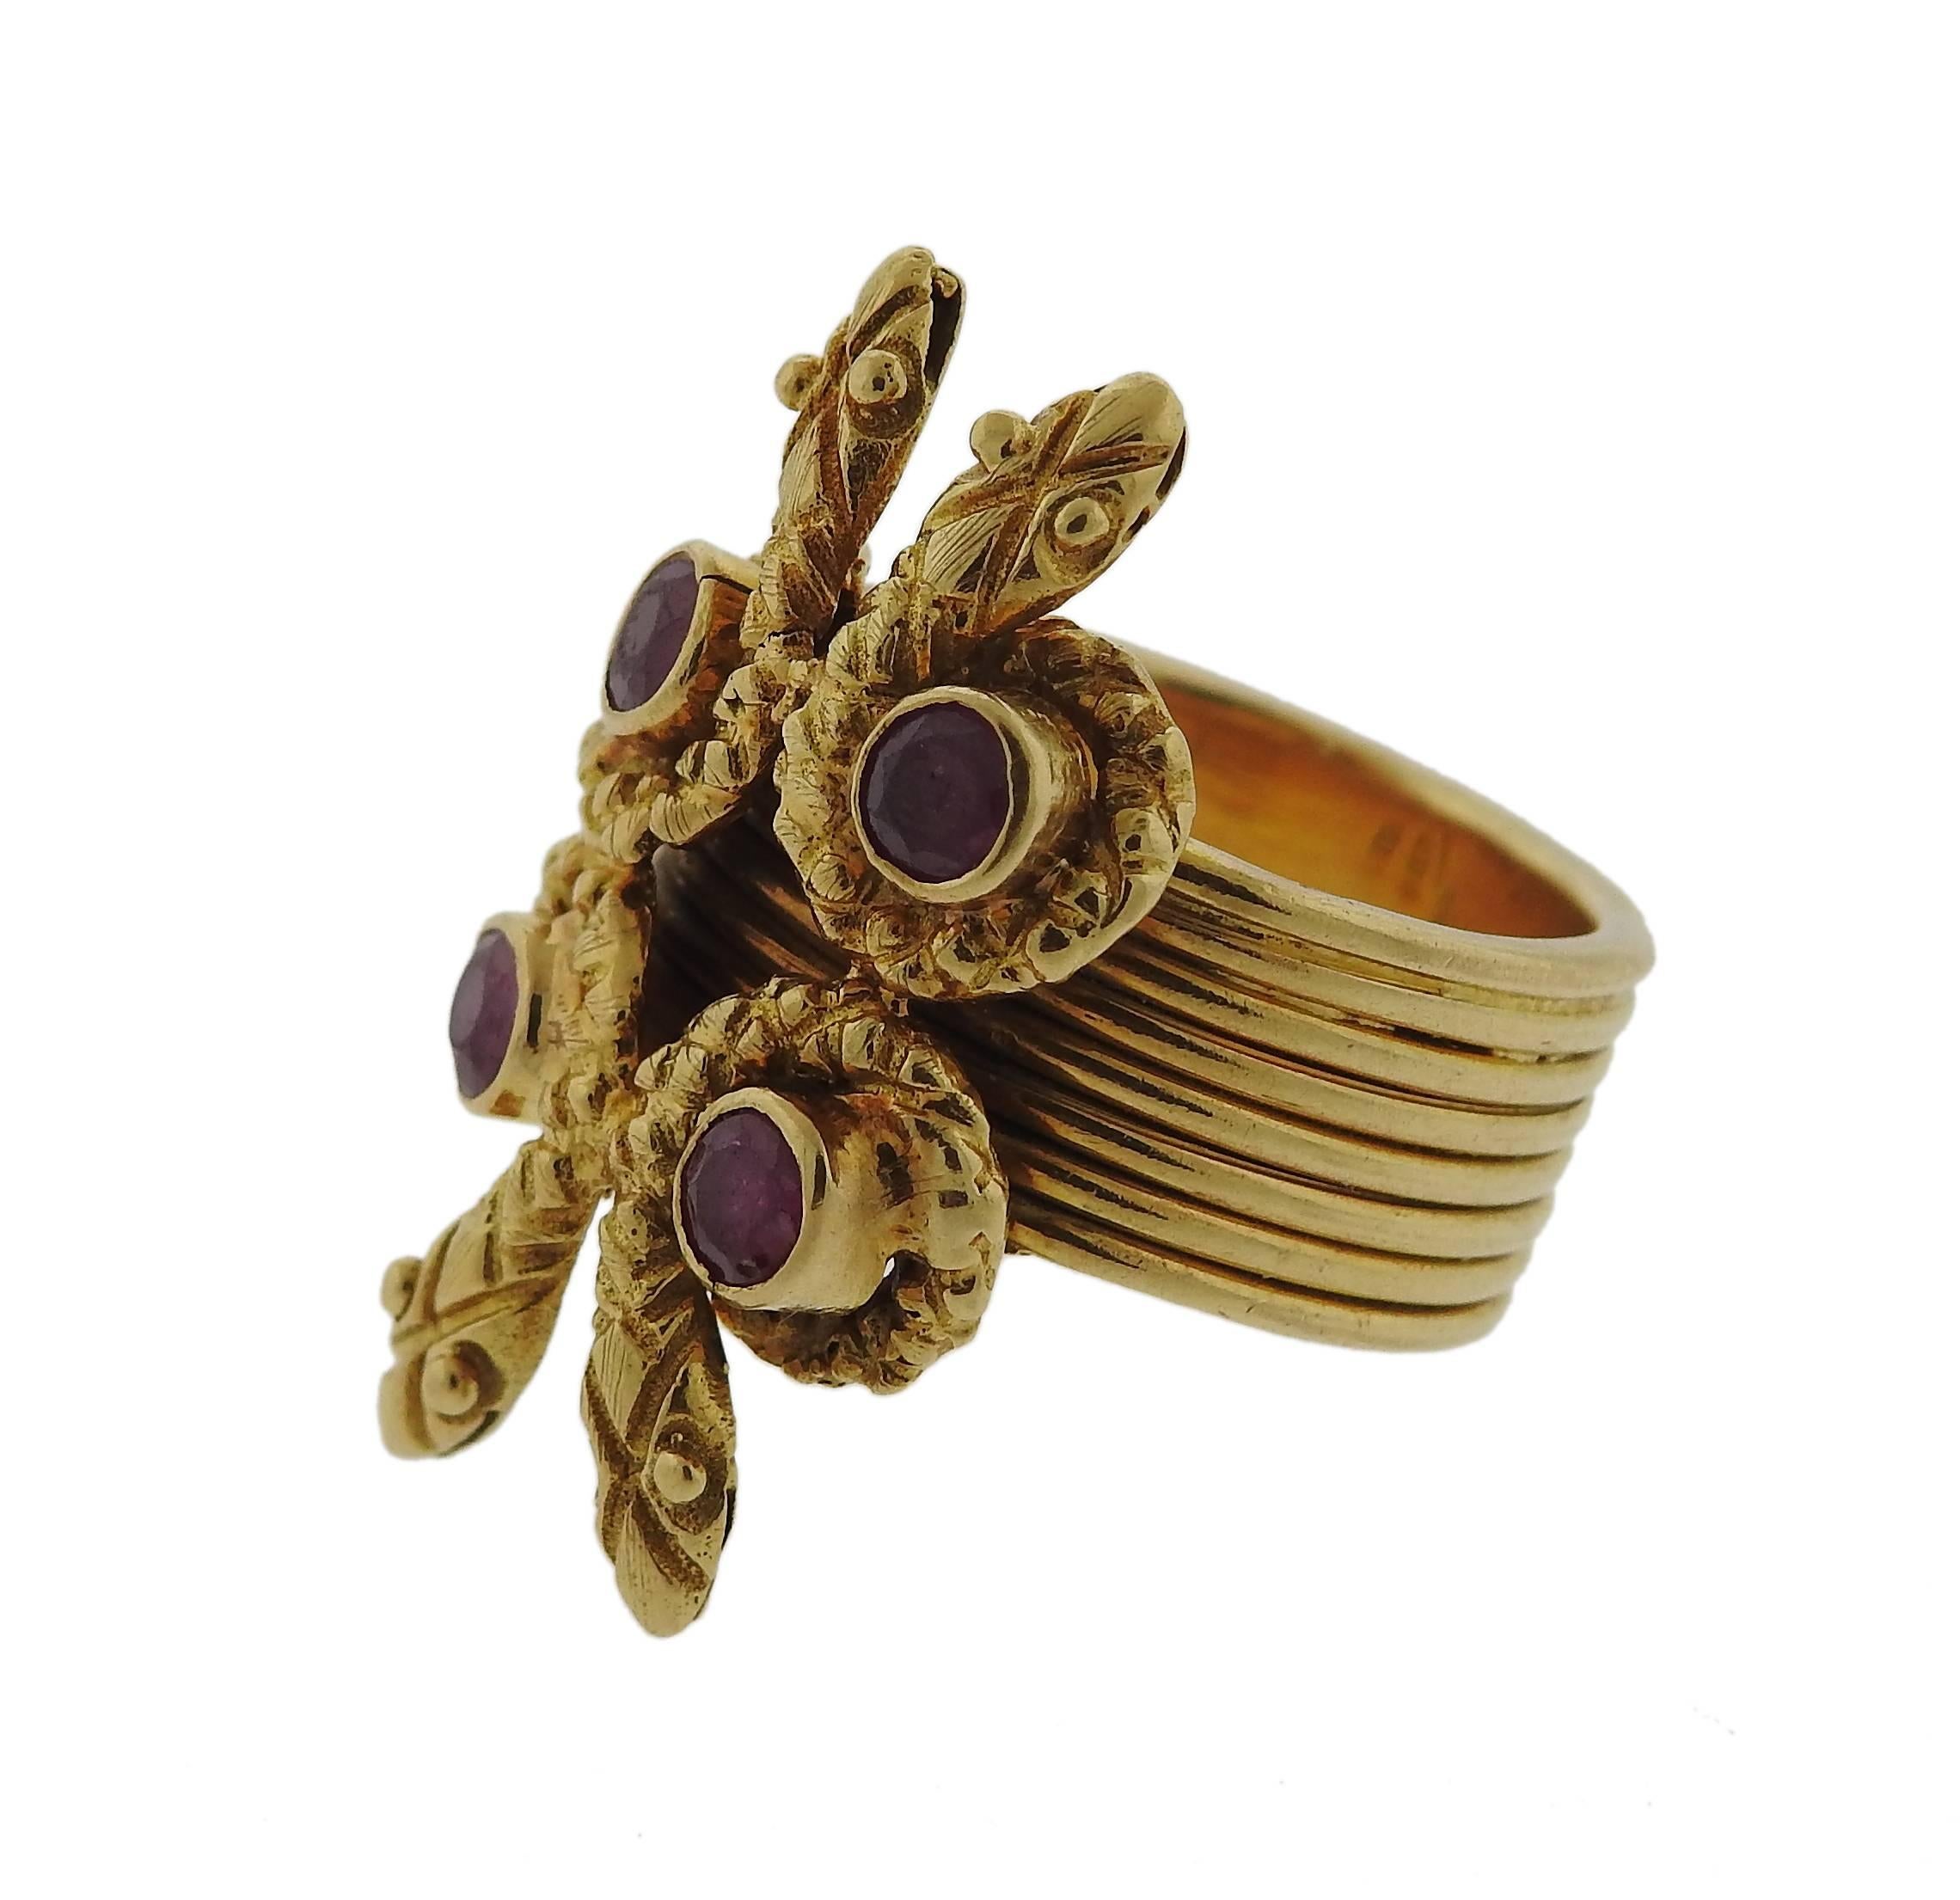 An 18k gold snake ring crafted by Zolotas featuring rubies. Ring is a size 5, ring top is 26mm x 14mm. Marked k18, Greece, Maker's mark . Weight is 11.7 grams.